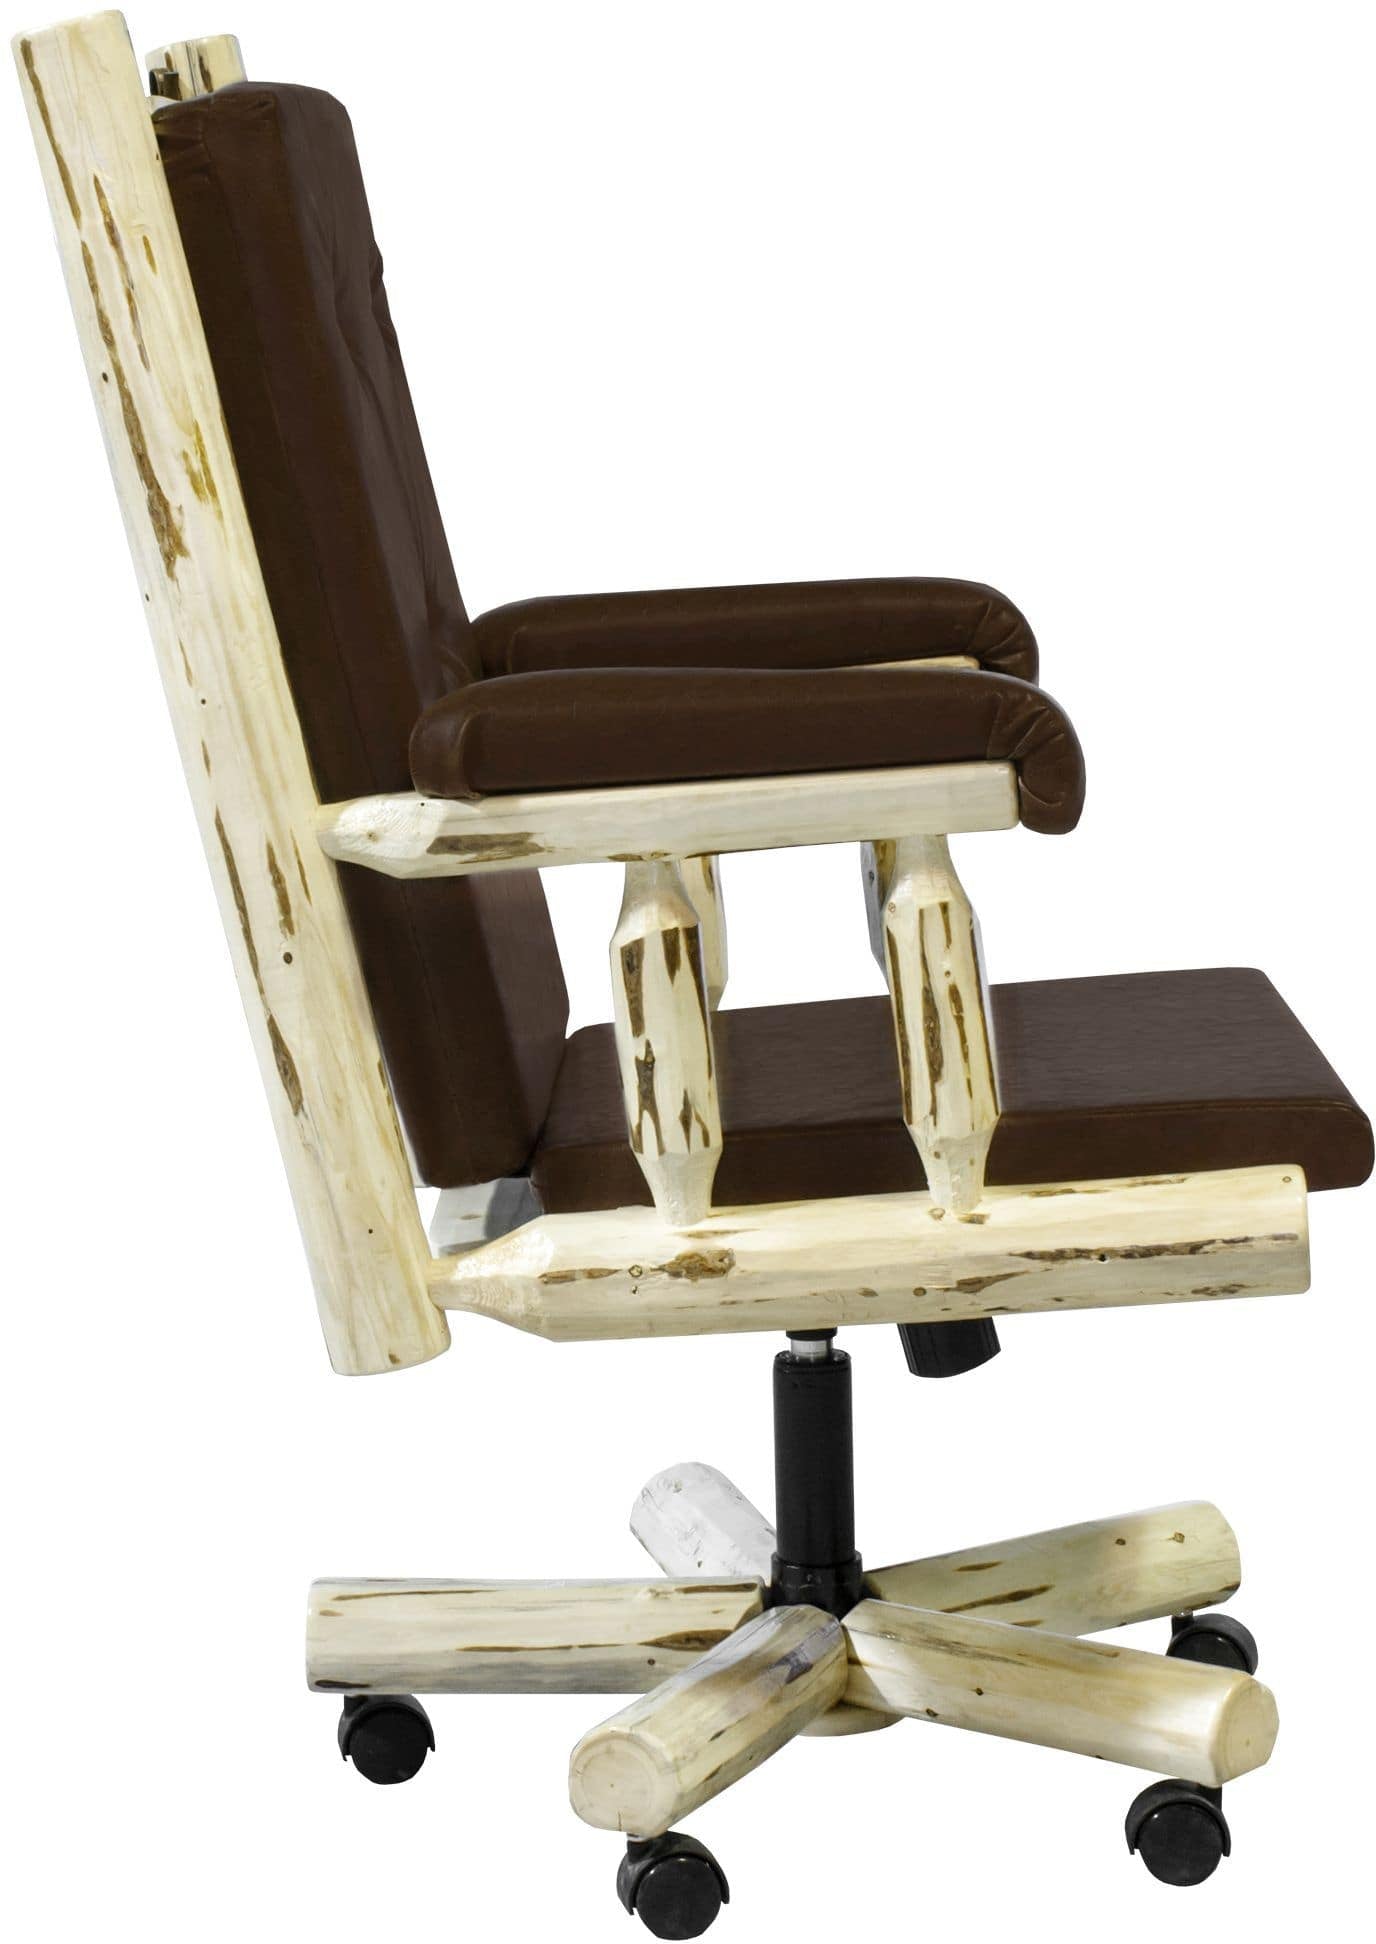 Montana Woodworks Montana Collection Upholstered Office Chair-Rustic Furniture Marketplace